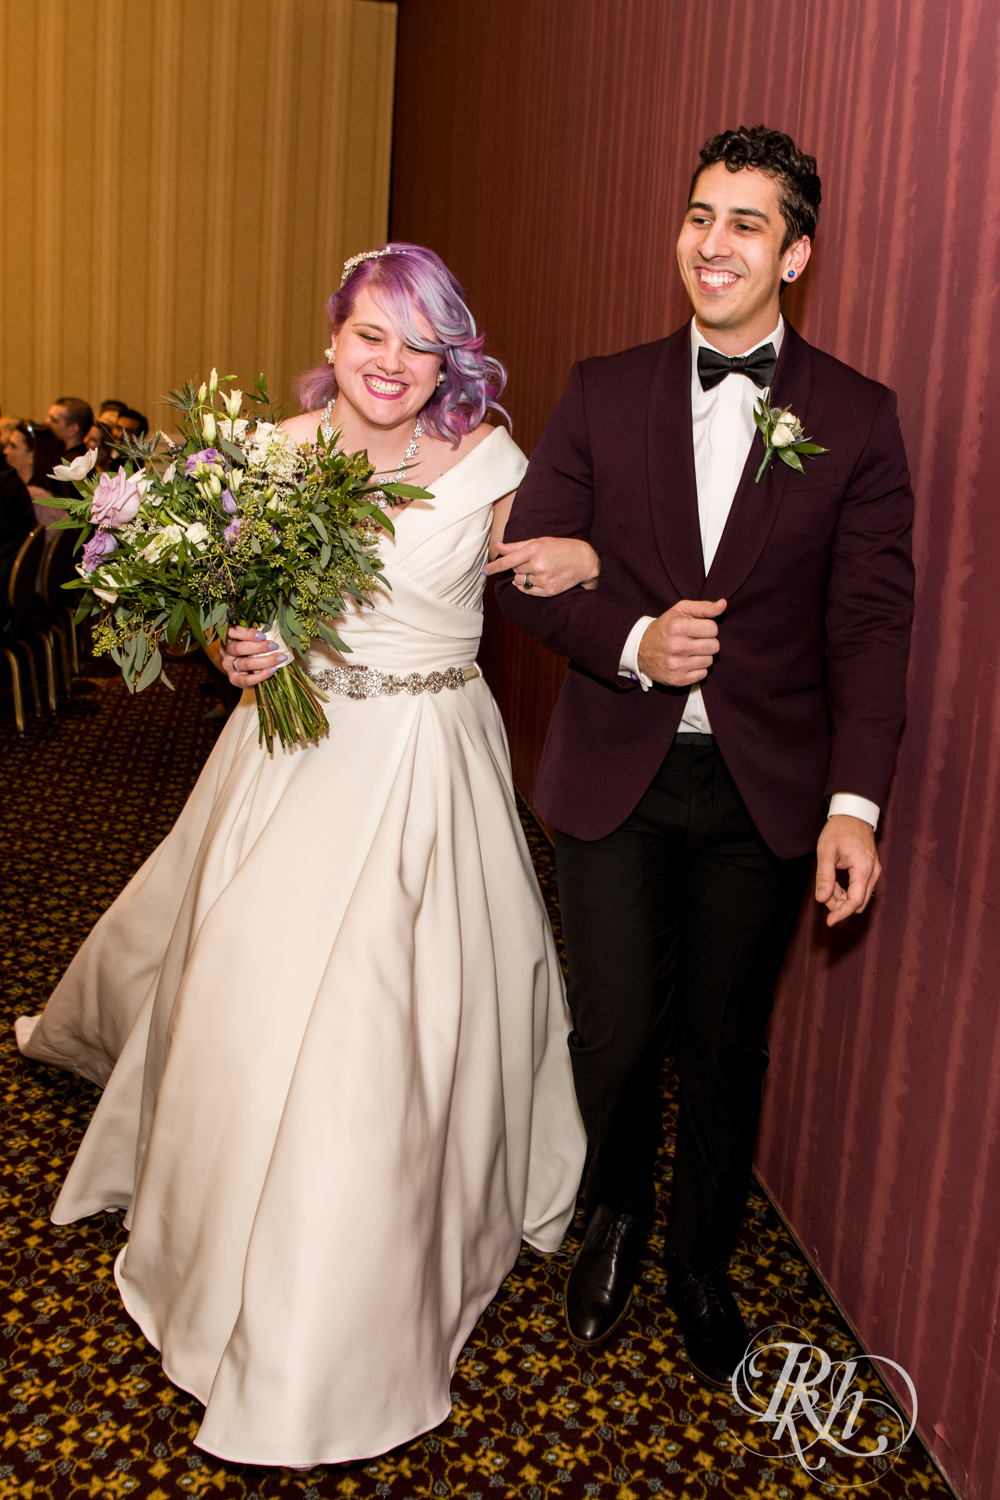 Bride and groom smiling at wedding ceremony at the Saint Paul Hotel in Saint Paul, Minnesota.